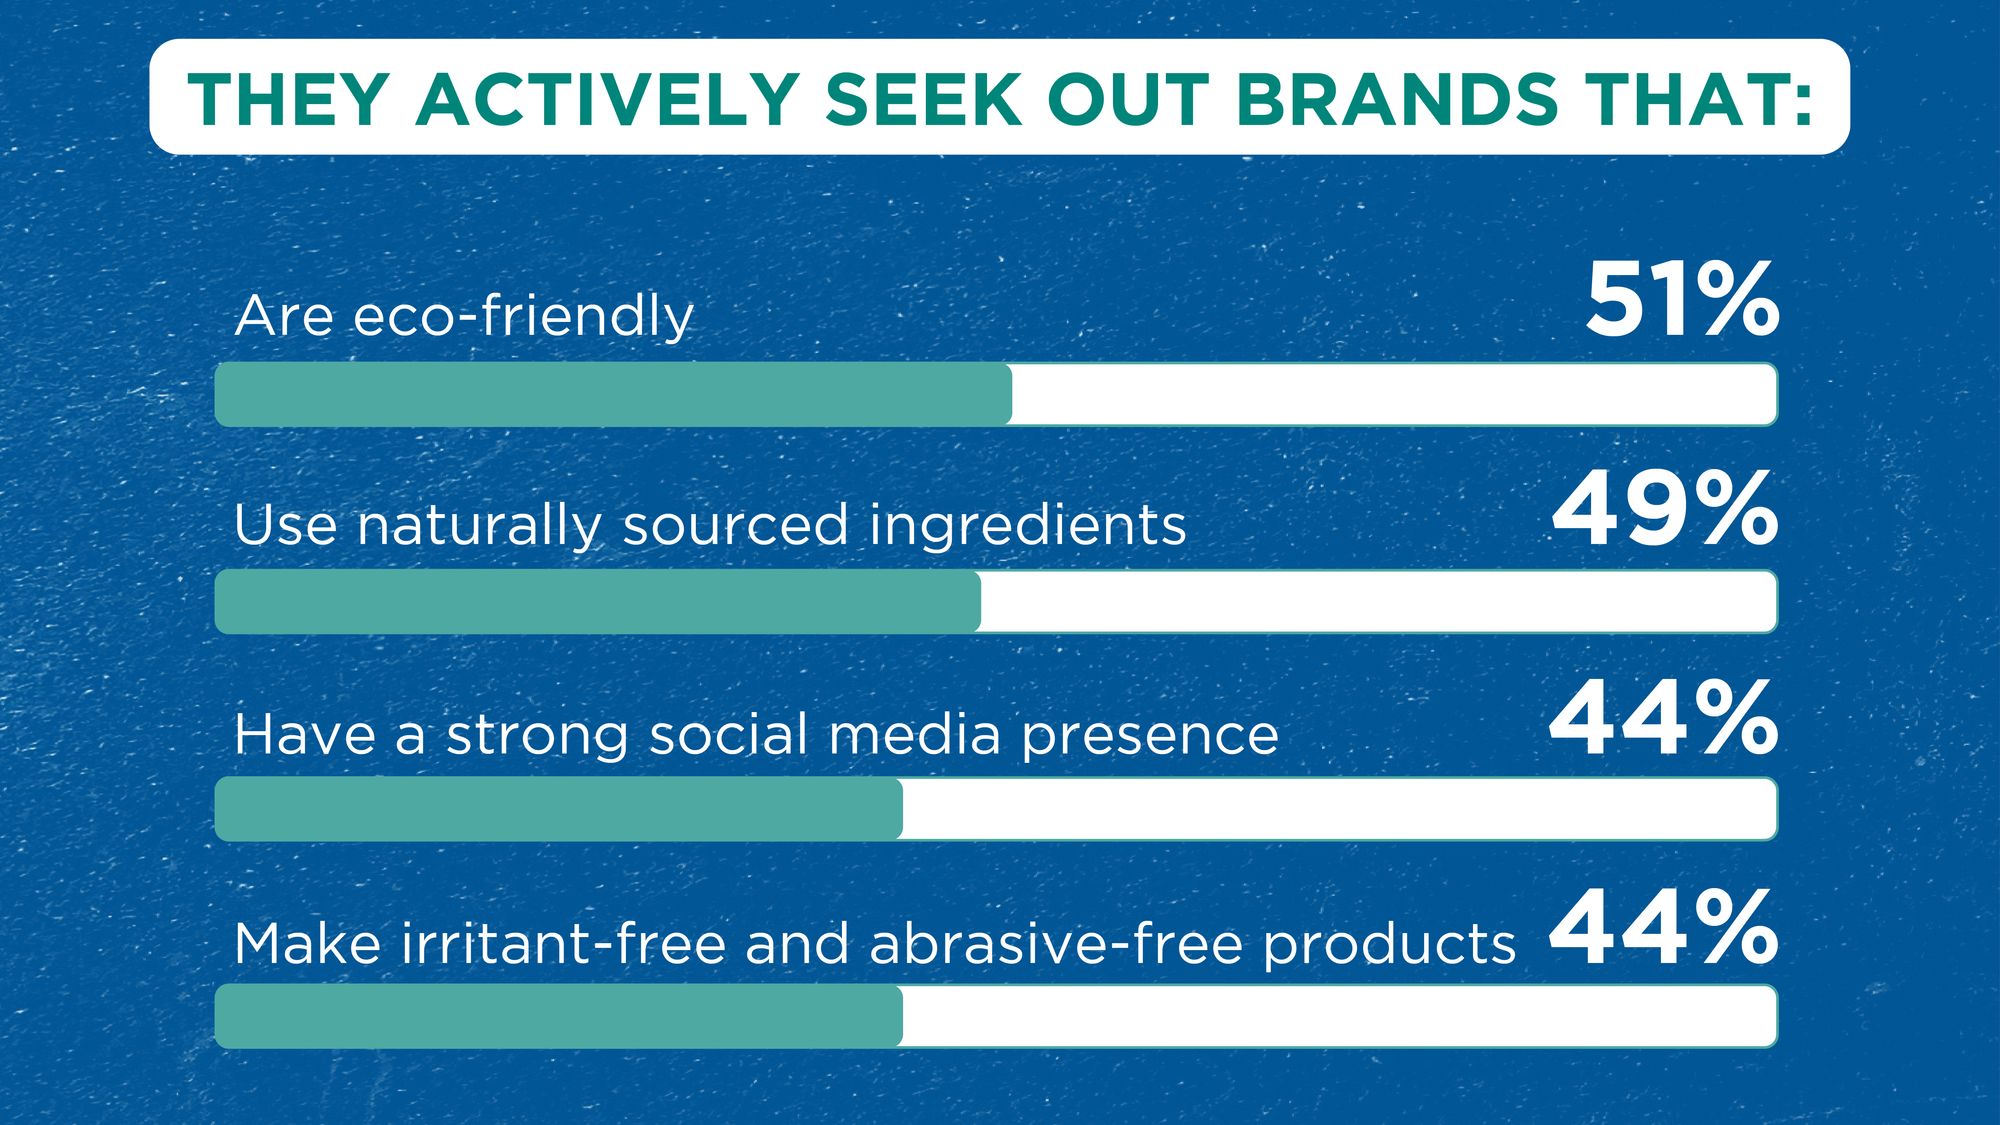 Graphic showing the following stats: They actively seek out brands that are eco-friendly (51%); use naturally sourced ingredients (49%); have a strong social media presence (44%); make irritant-free and abrasive-free products (44%).